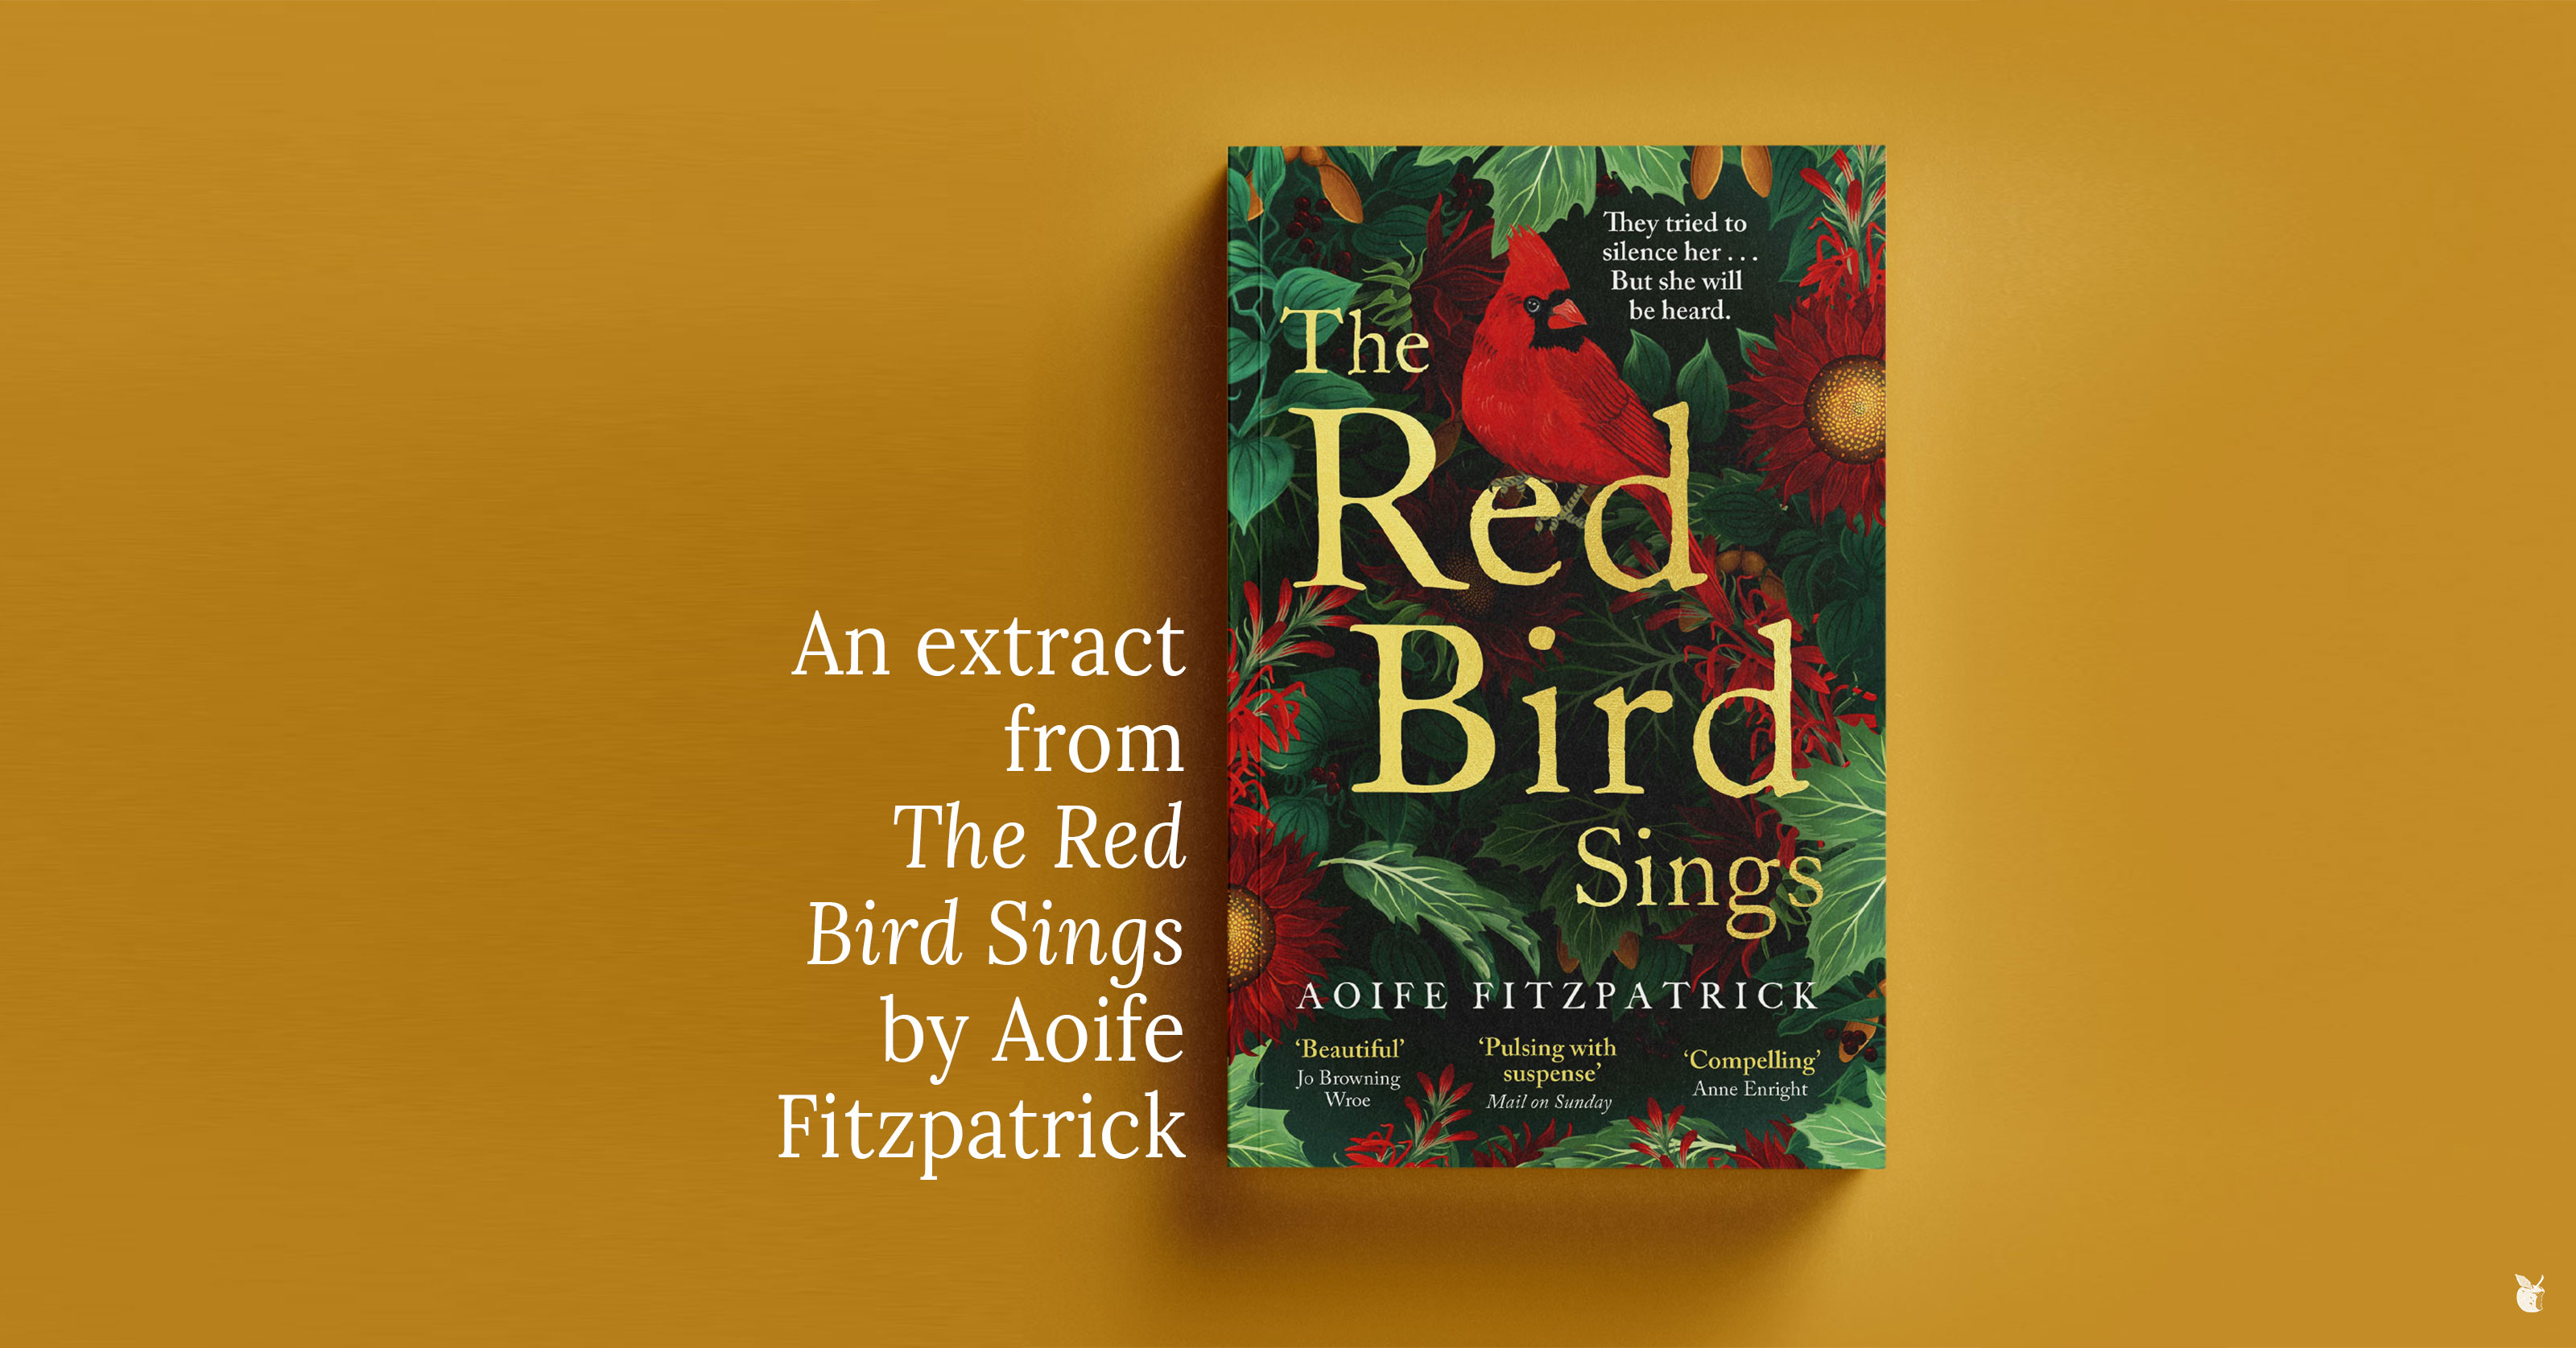 Read an extract from The Red Bird Sings by Aoife Fitzpatrick